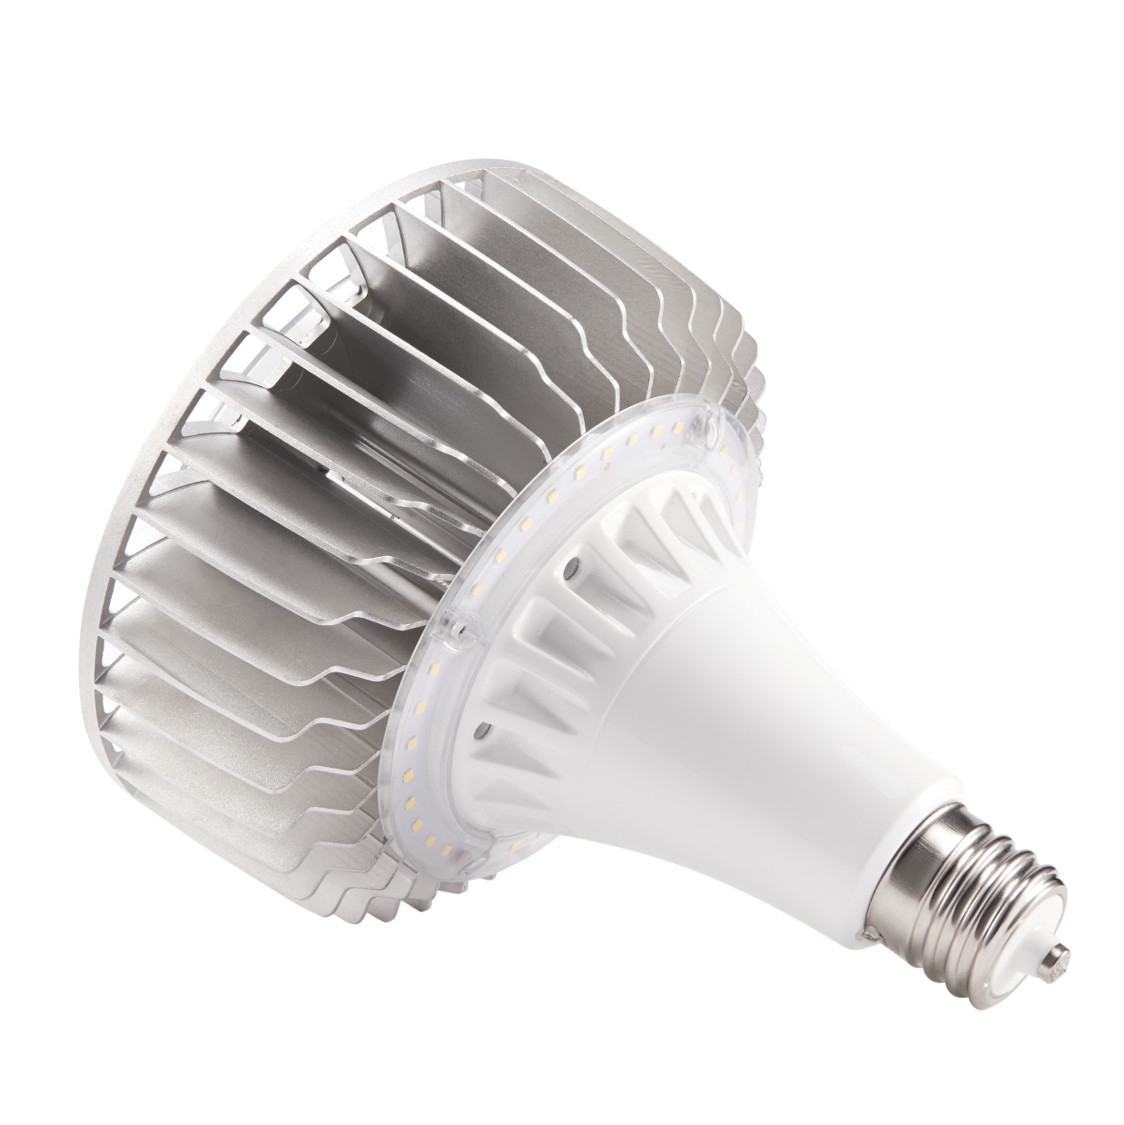 HS Series 400W High Bay LED Lamp High Pressure Sodium Replacement